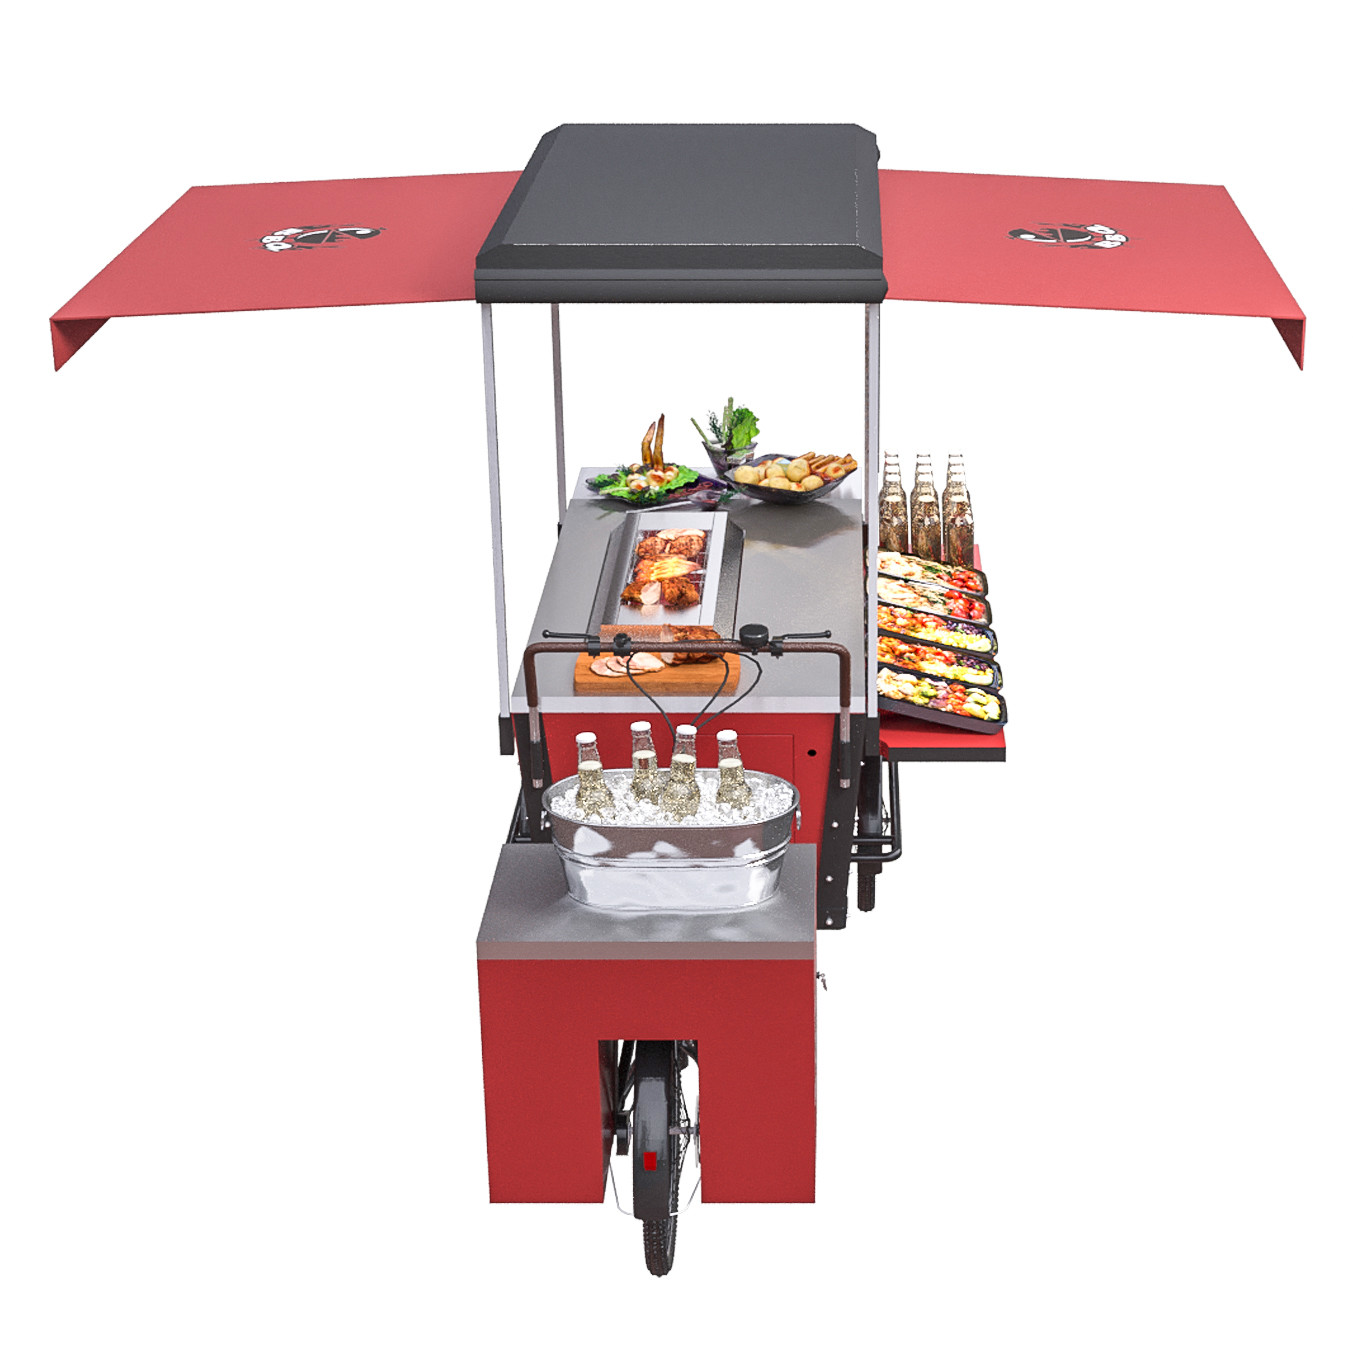 Fried Hot Dog BBQ Leisure Vending Grill Food Cart